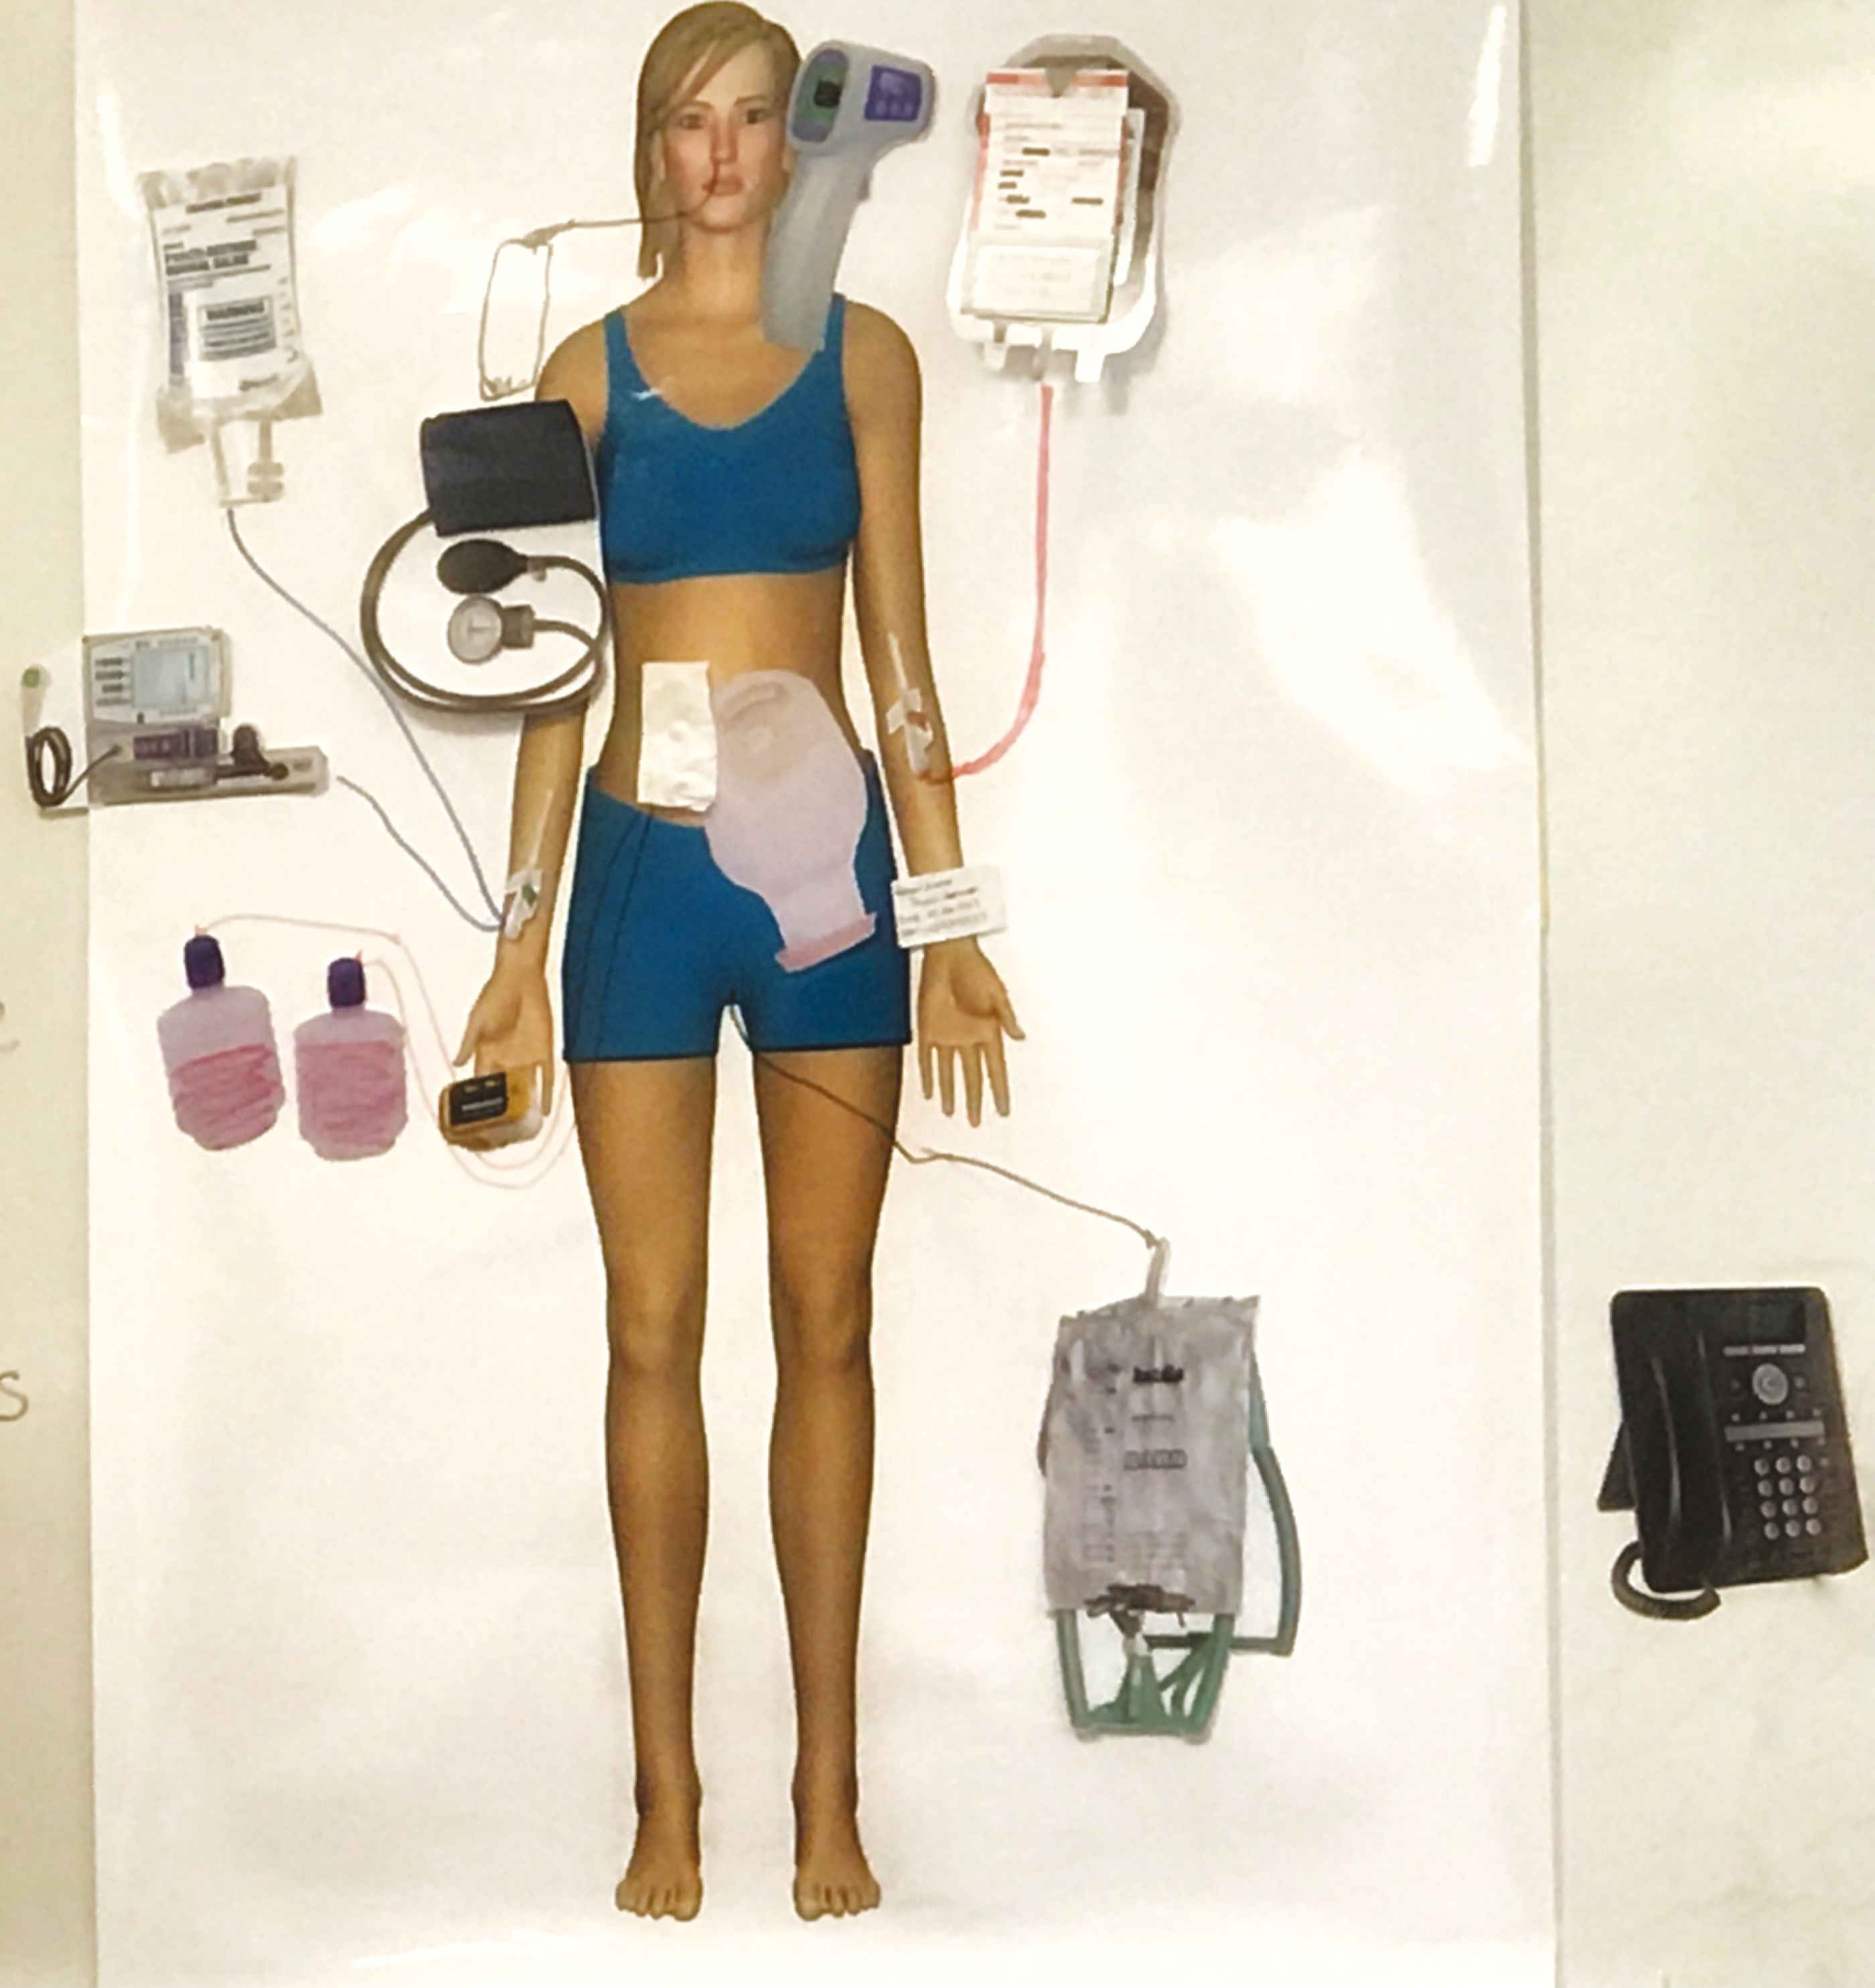 An example of the patient poster, equipment vignettes and props